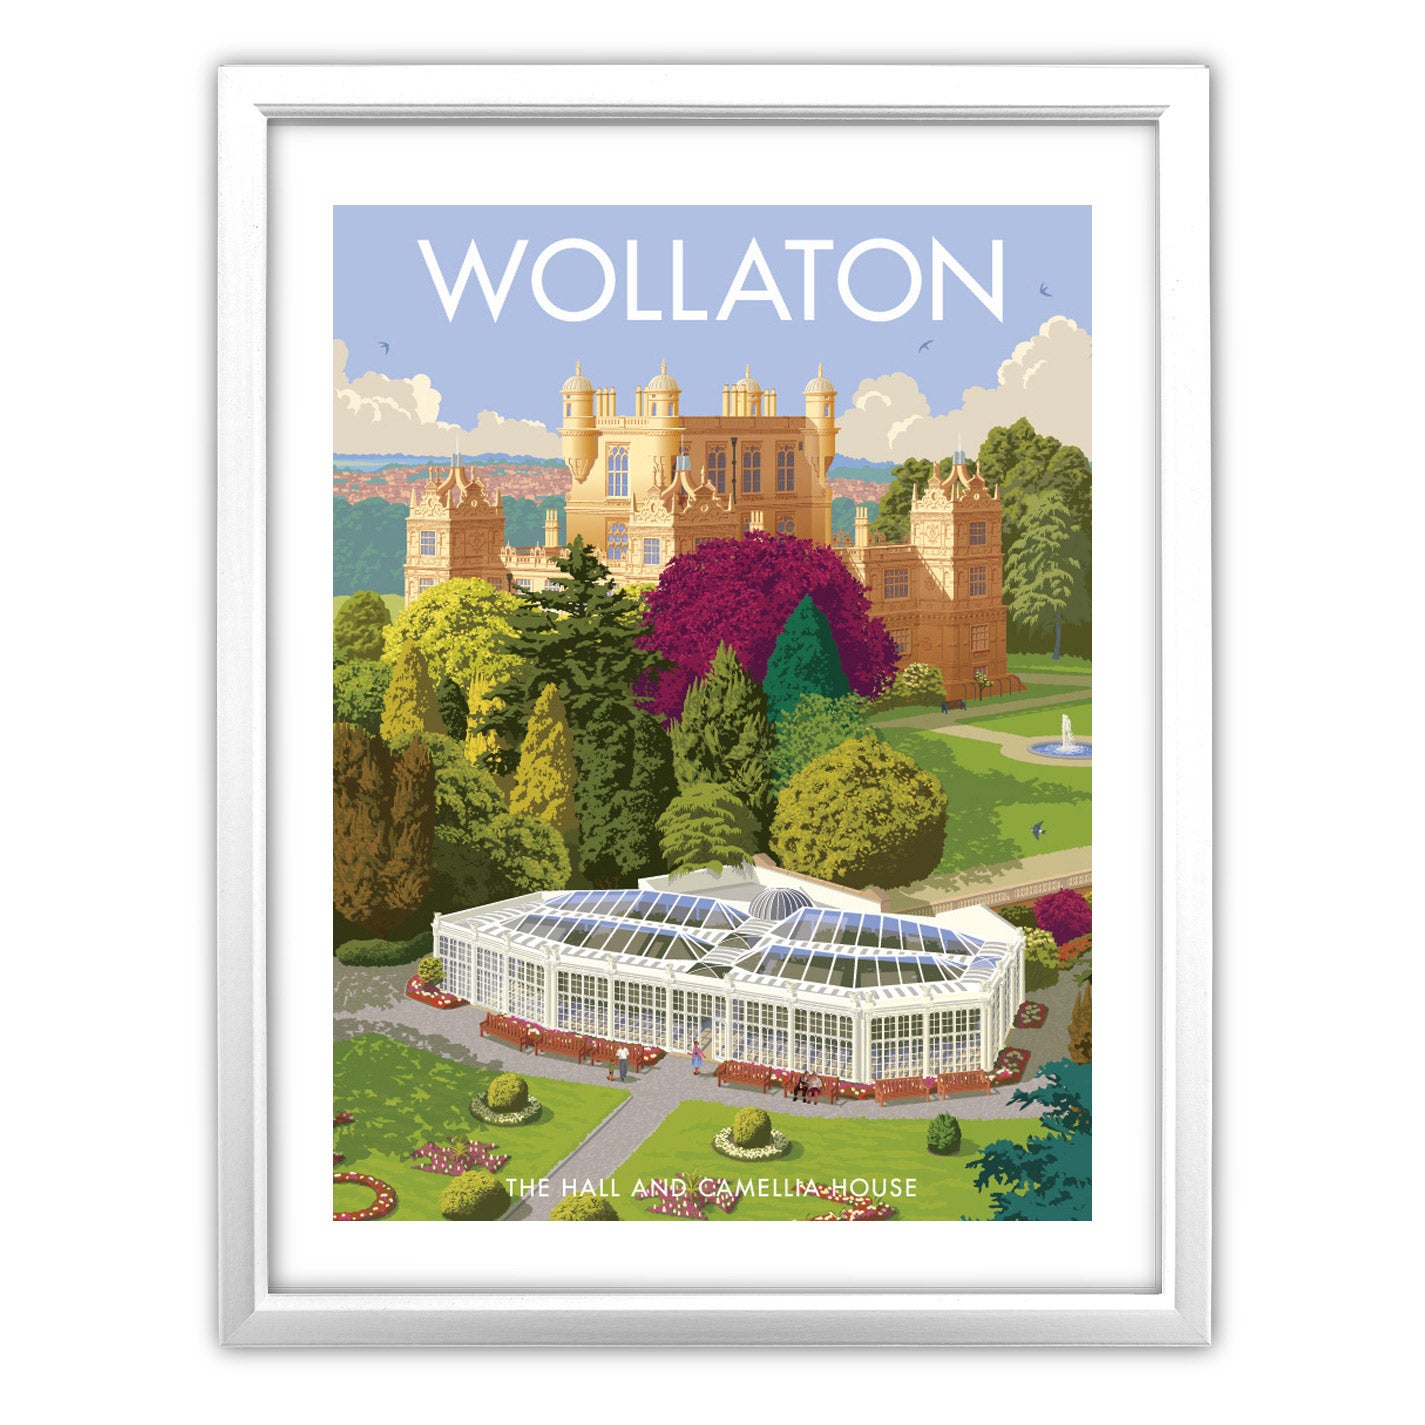 Wollaton, The Hall and Camellia House Art Print